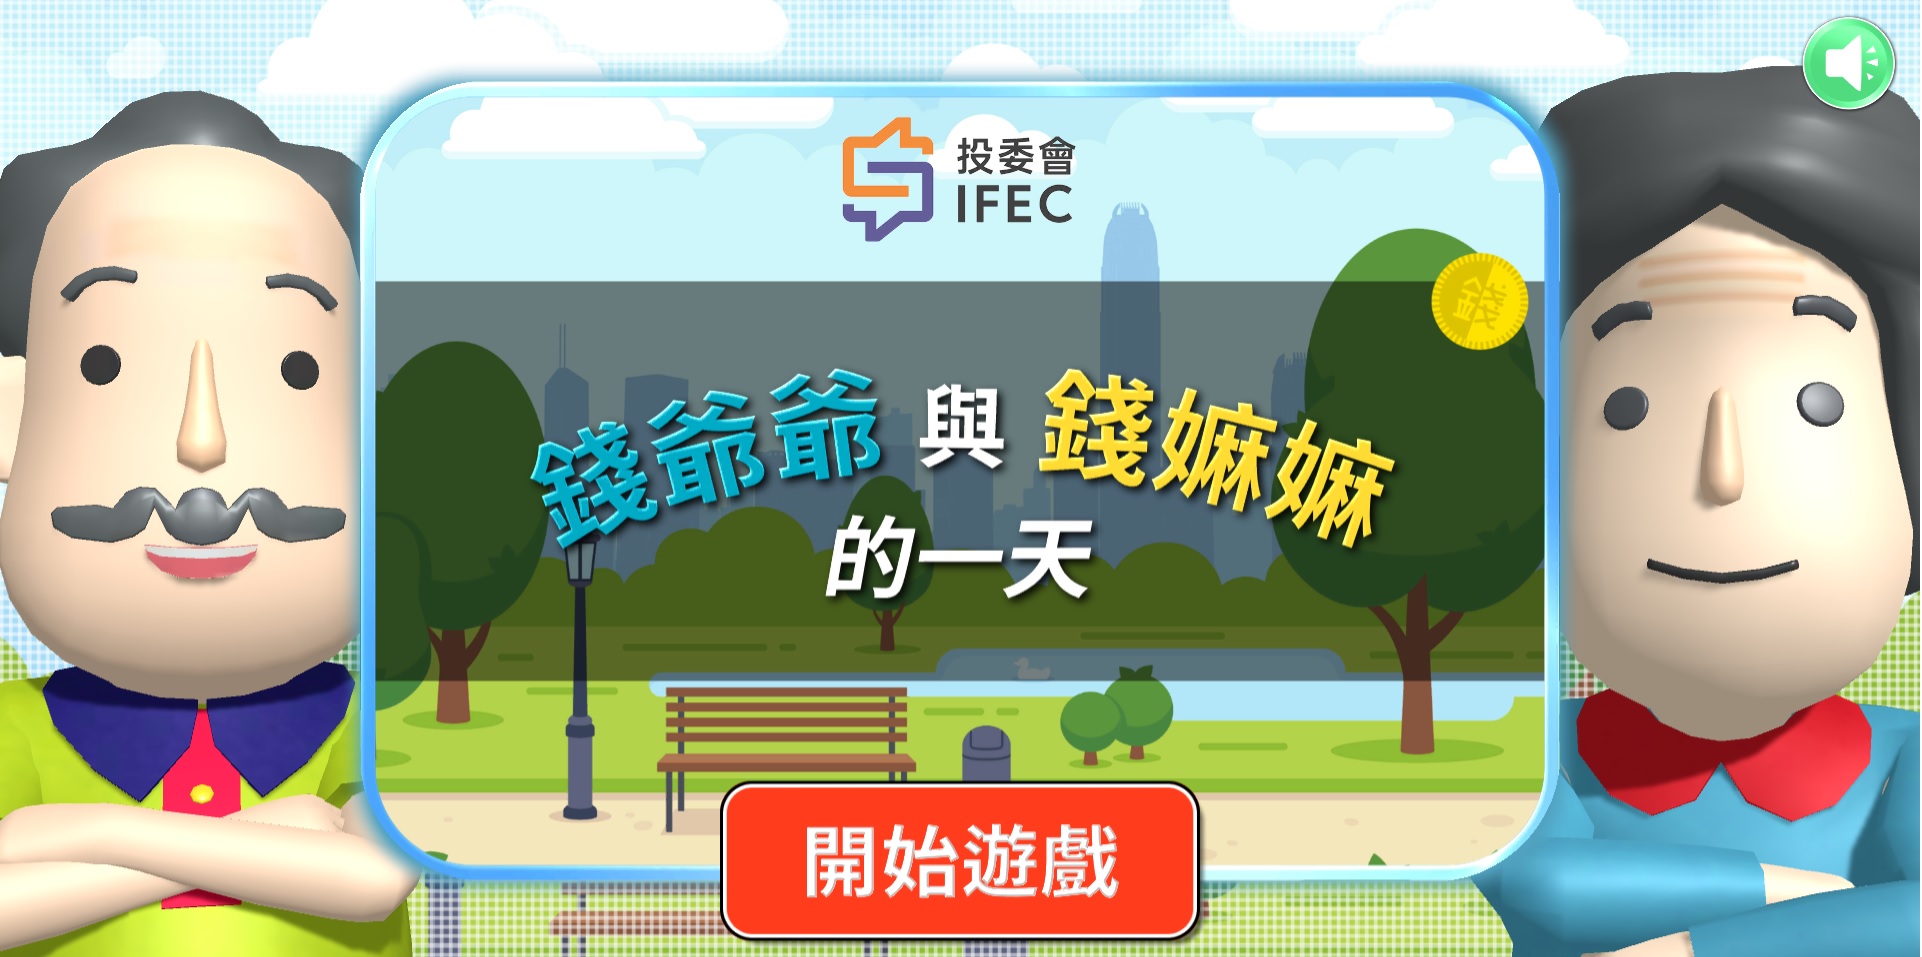 "One day adventure with Grandparents Chin" anti-financial-scam game (Chinese only)